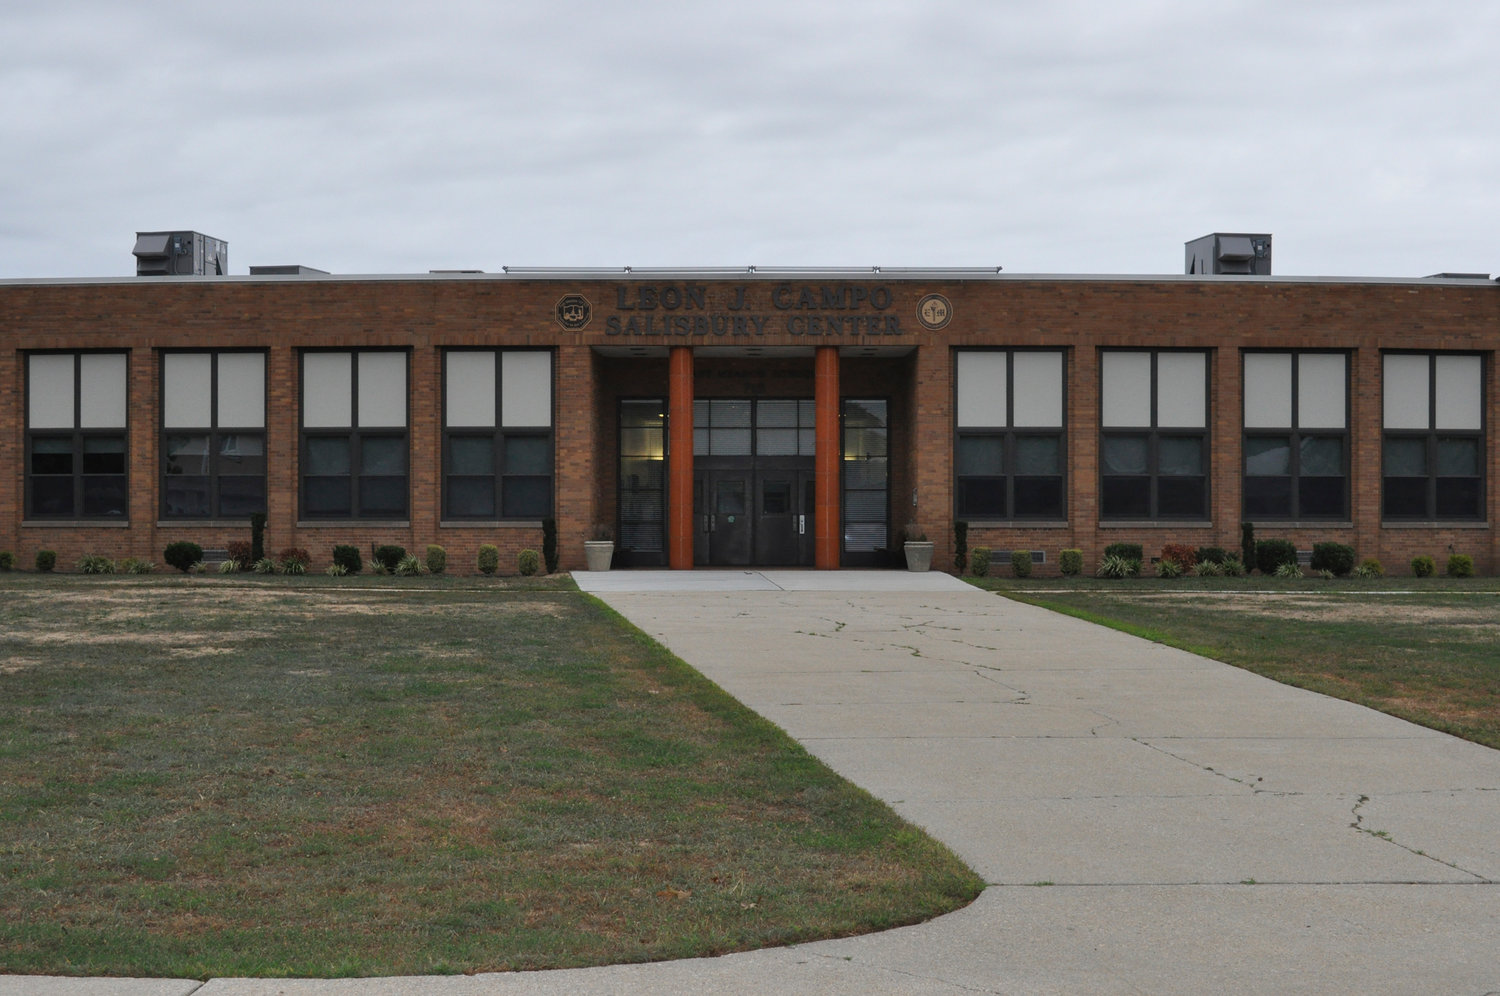 An audit by state Comptroller Thomas DiNapoli’s office showed that the East Meadow School District accrued more than $1.1 million in overtime costs in the facilities and operations department.